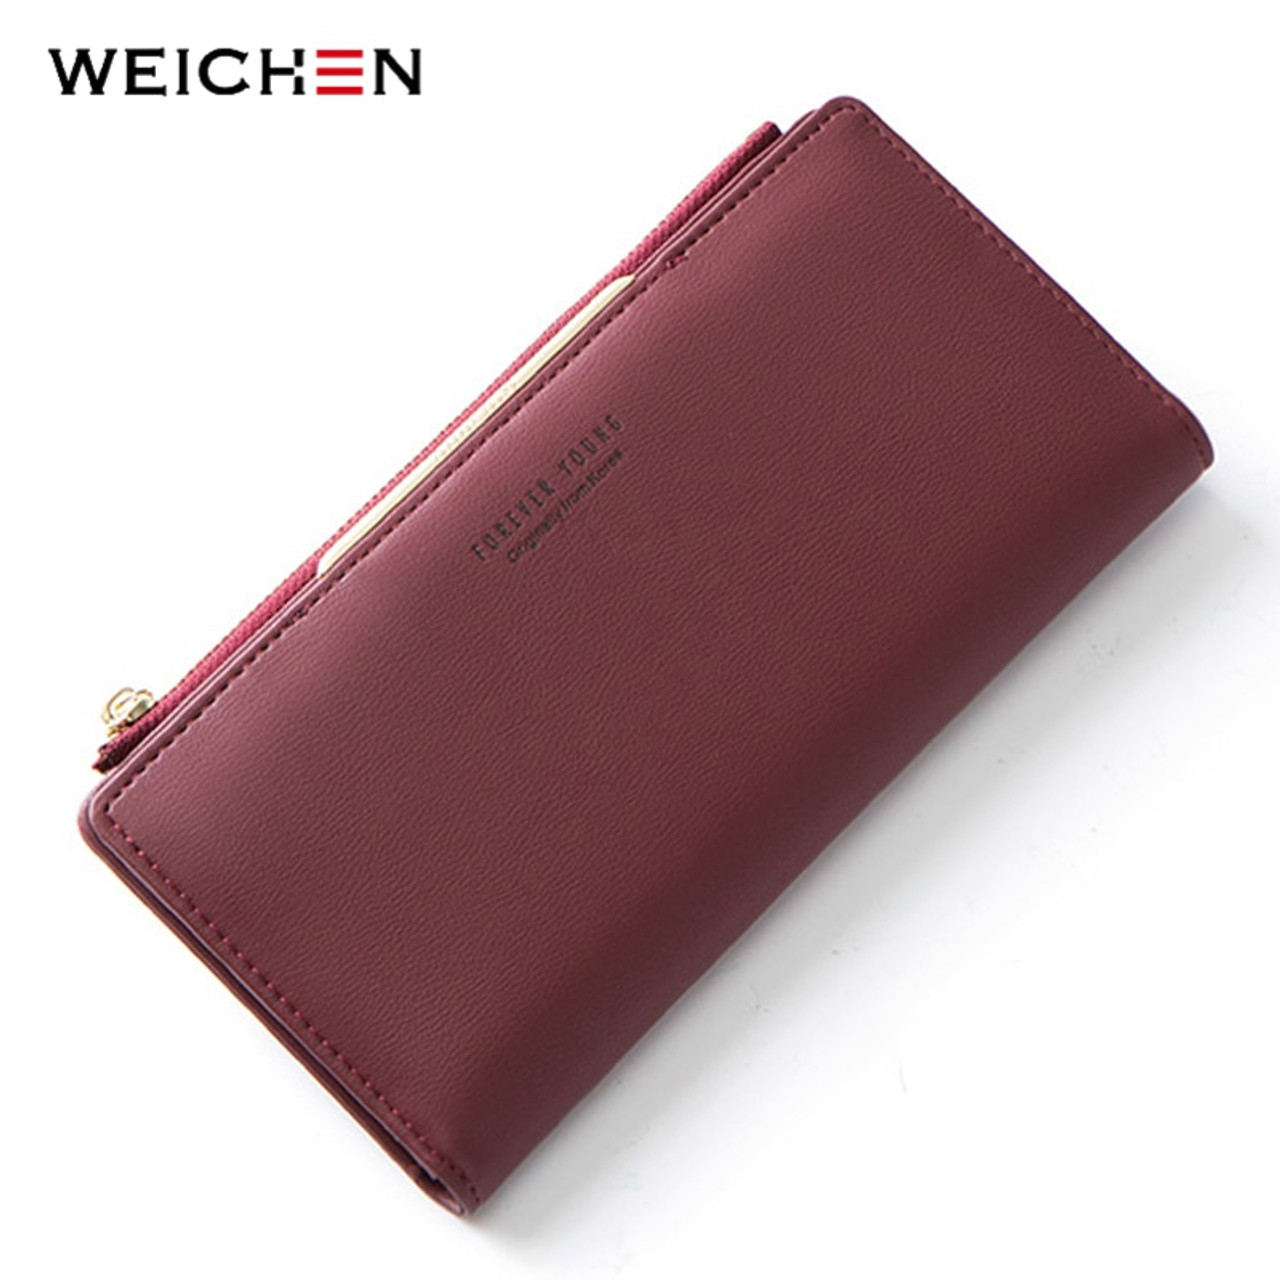 STYLISH PINK WOMENS HAND CLUTCH WALLET PURSE FOR LADIES GIRLS SOFT LEATHER  WITH MOBILE POCKET PURSE